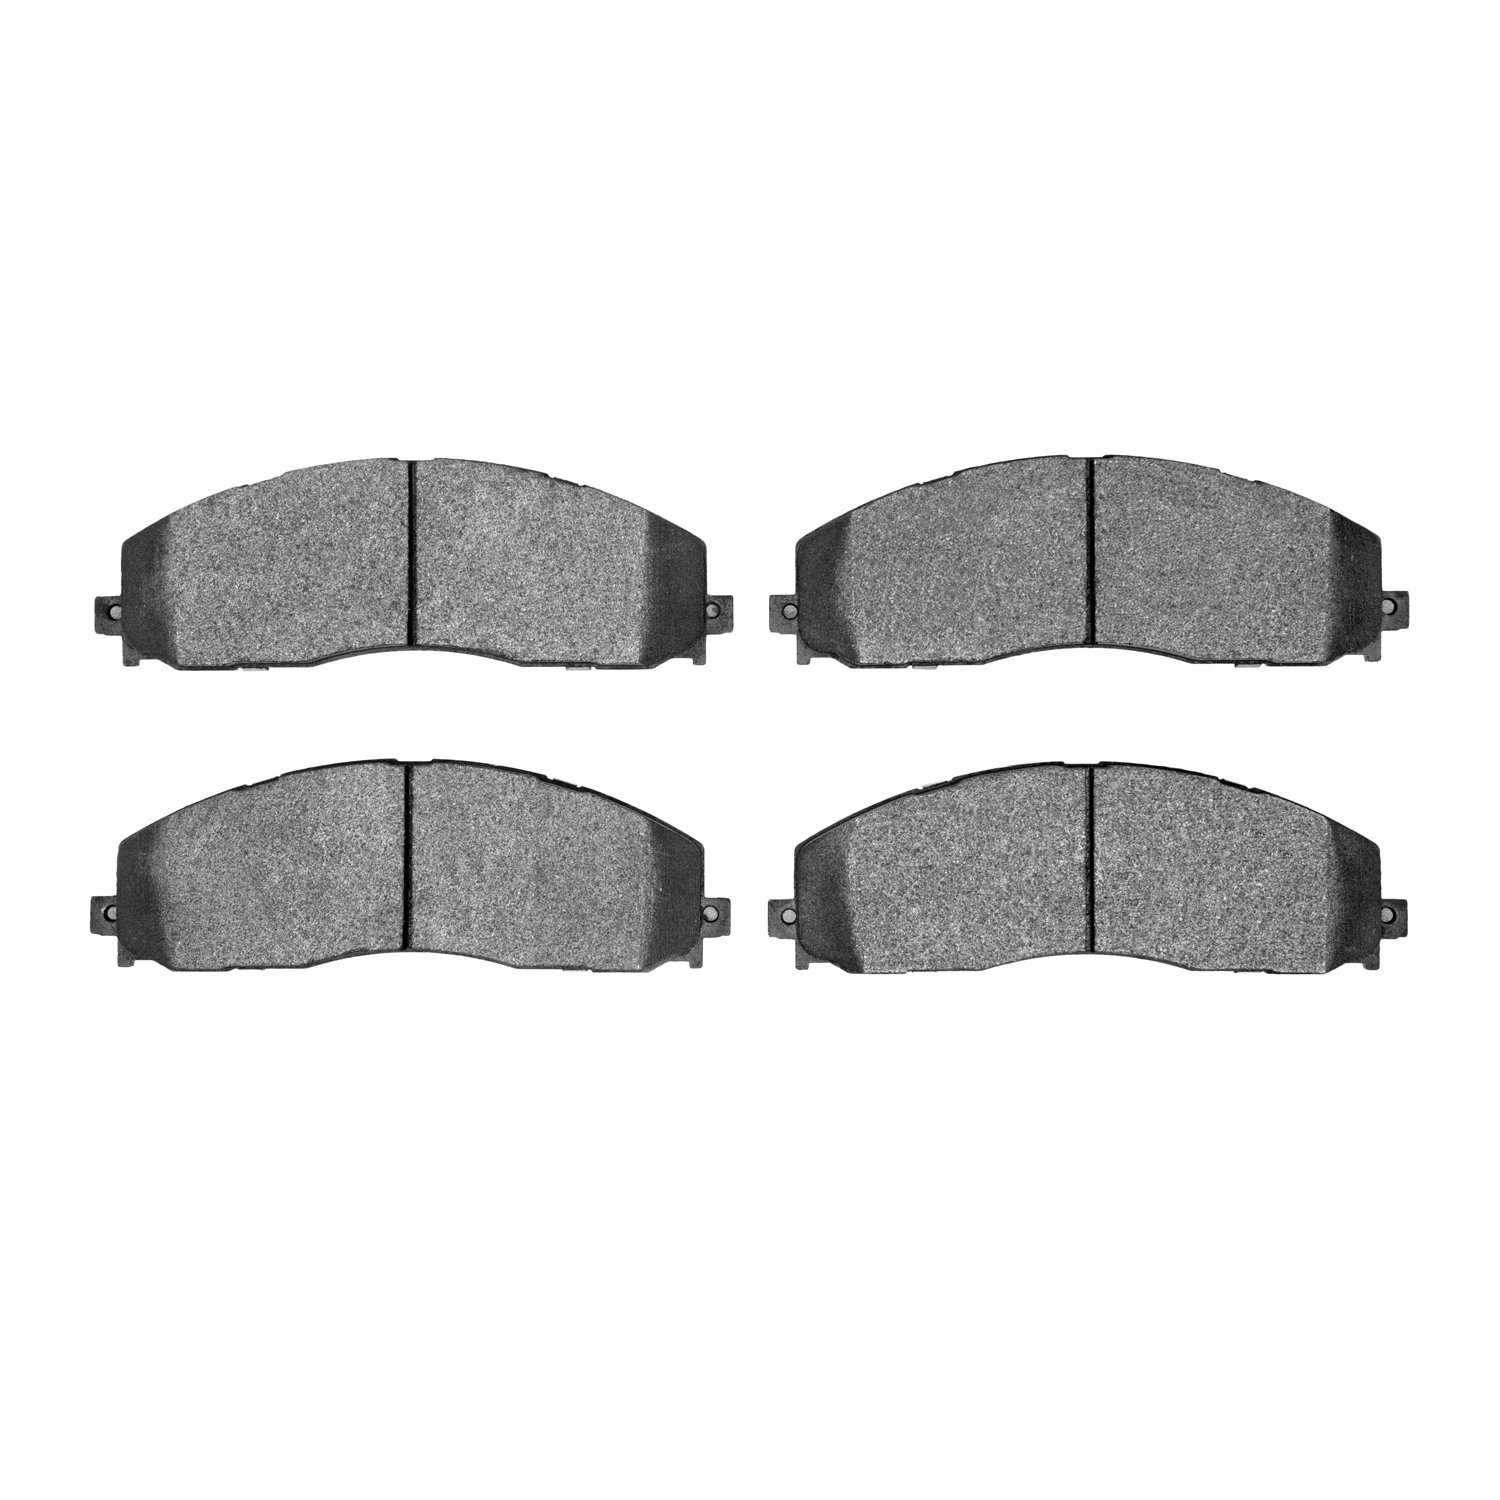 1551-1680-00 5000 Advanced Semi-Metallic Brake Pads, Fits Select Ford/Lincoln/Mercury/Mazda, Position: Fr,Front